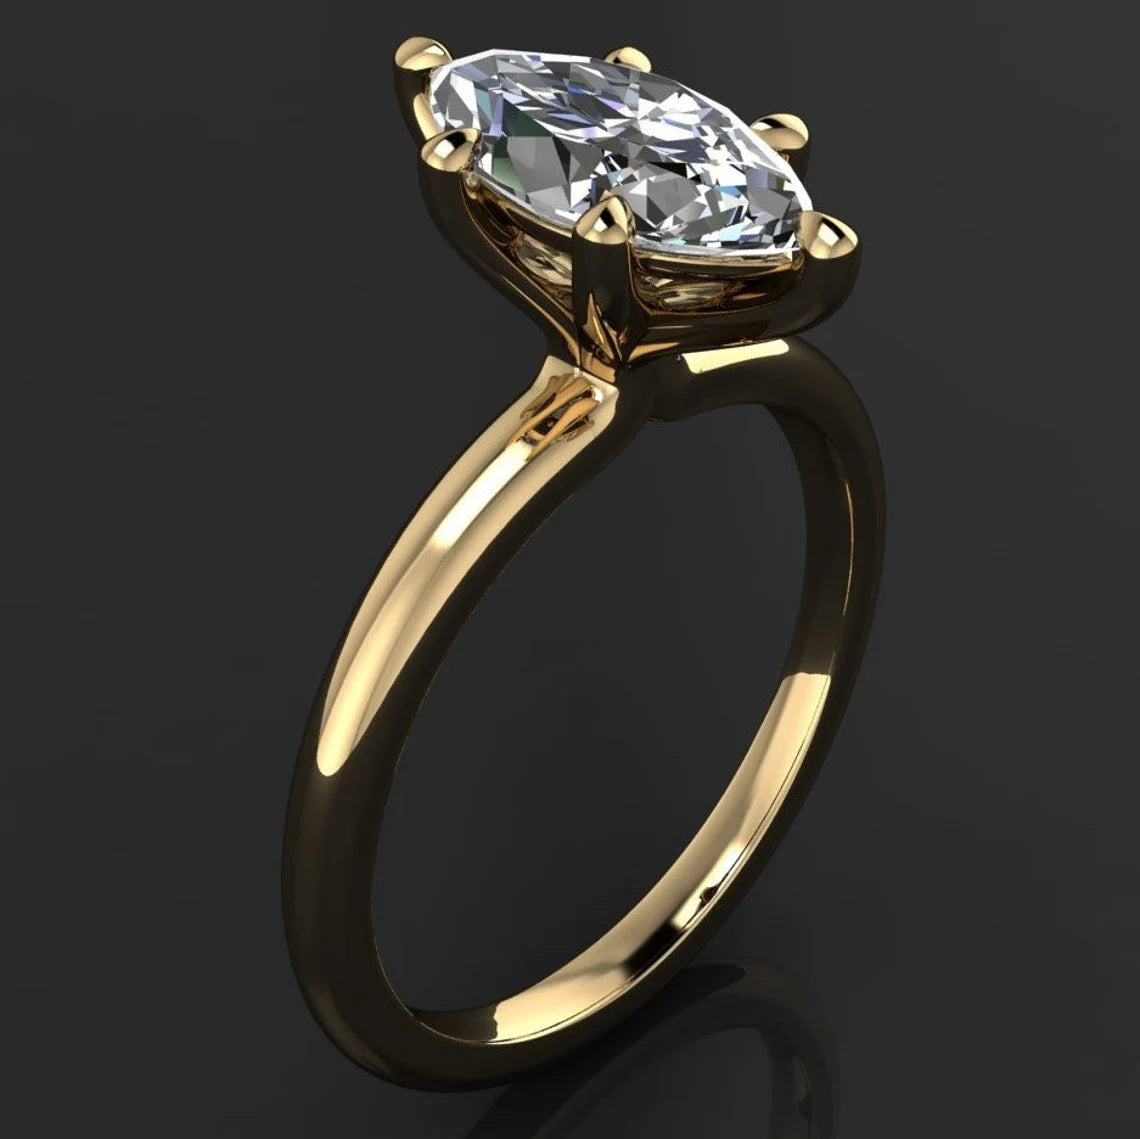 Marquise Cut Diamond Rings, Engagement Ring Trend | Natural Diamonds